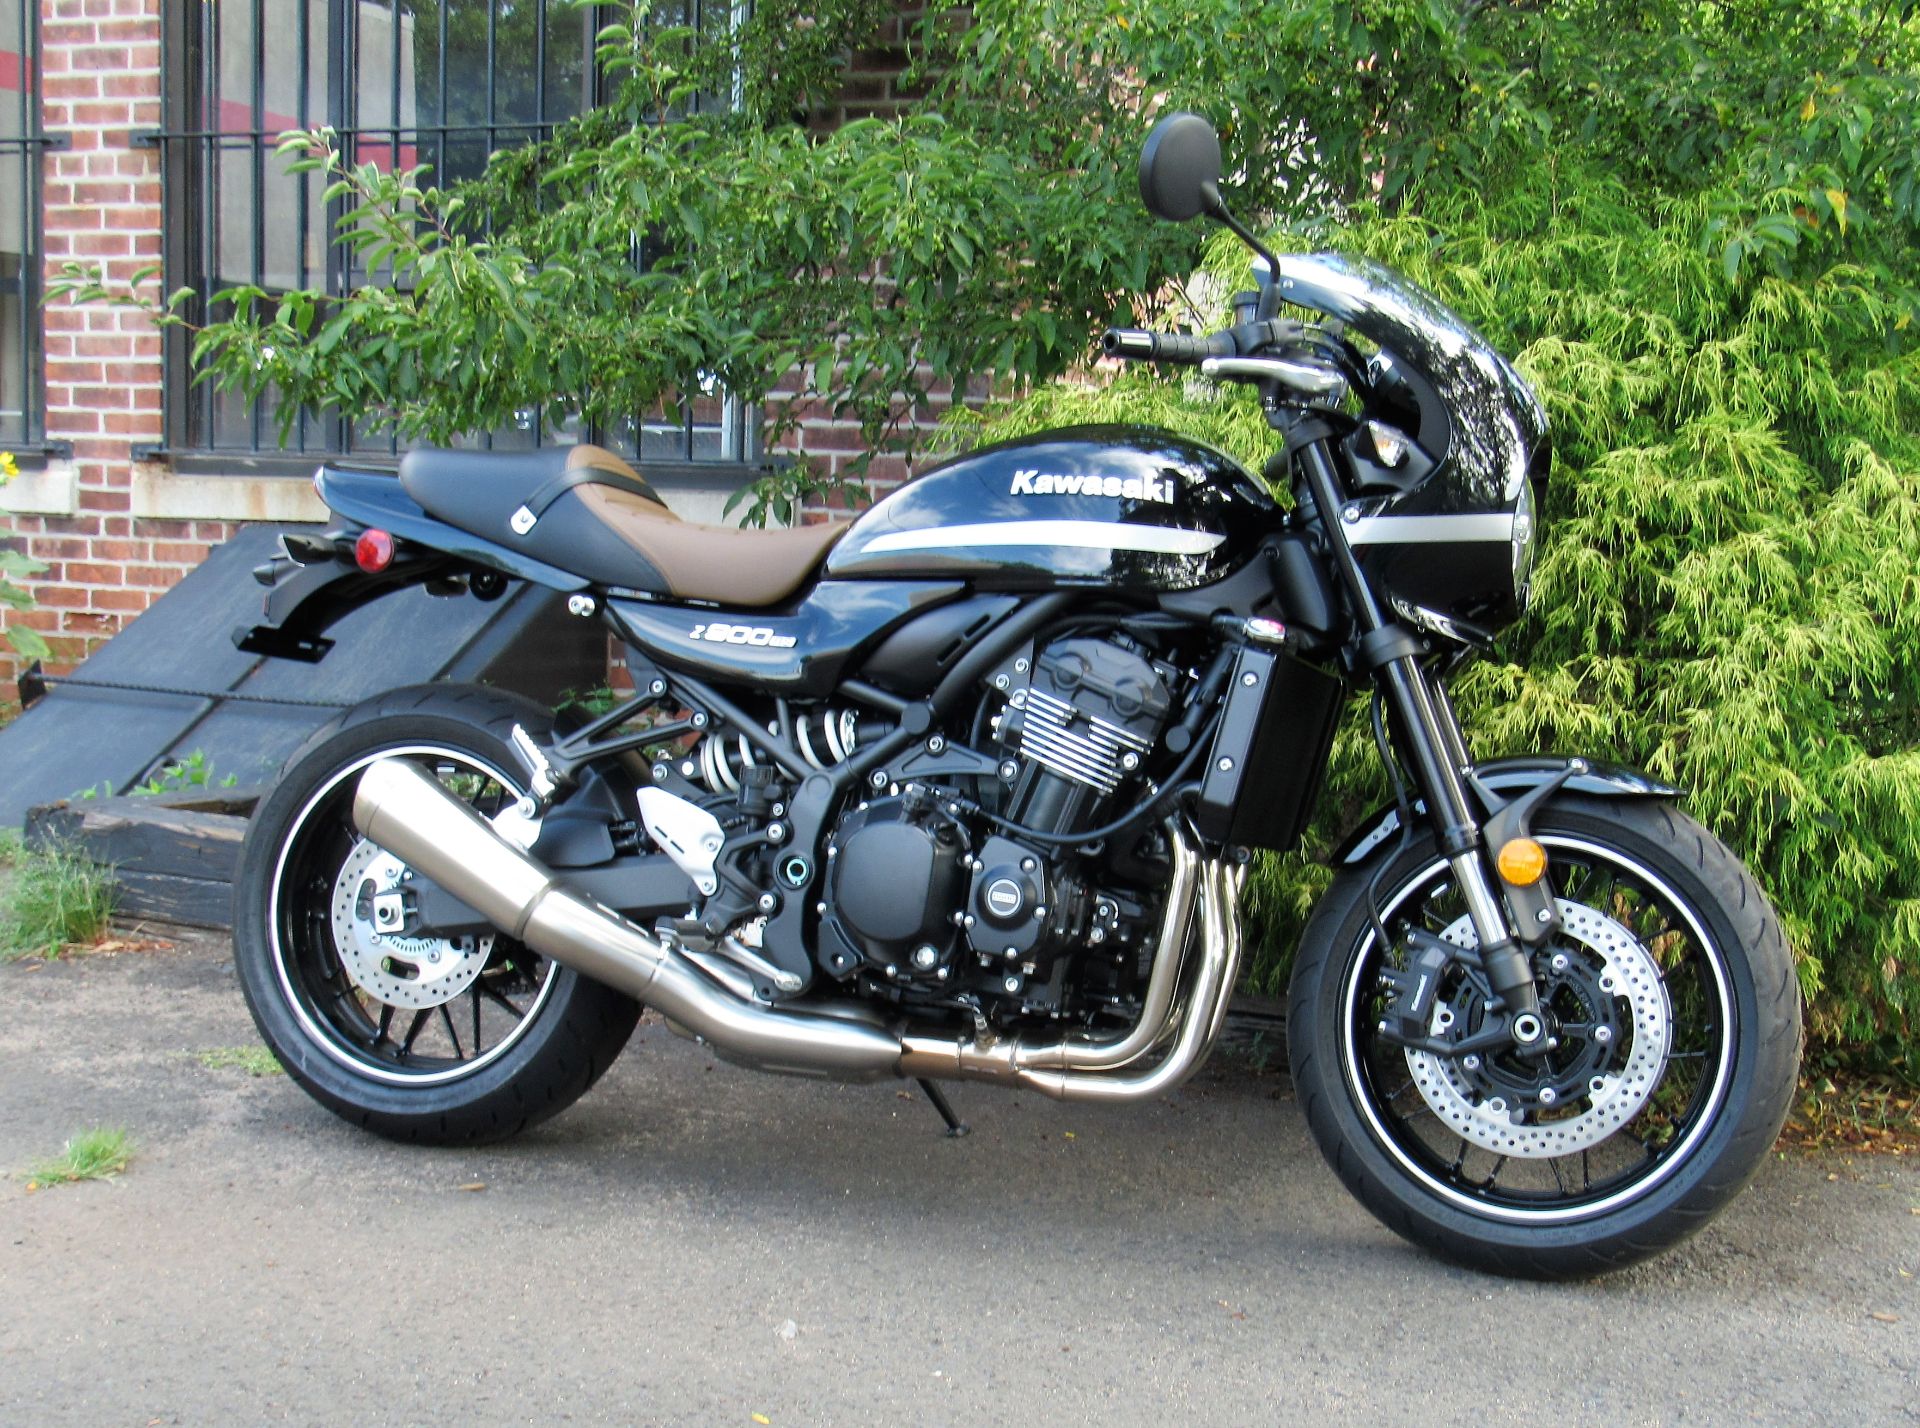 2022 Kawasaki Z900RS Cafe in New Haven, Connecticut - Photo 3